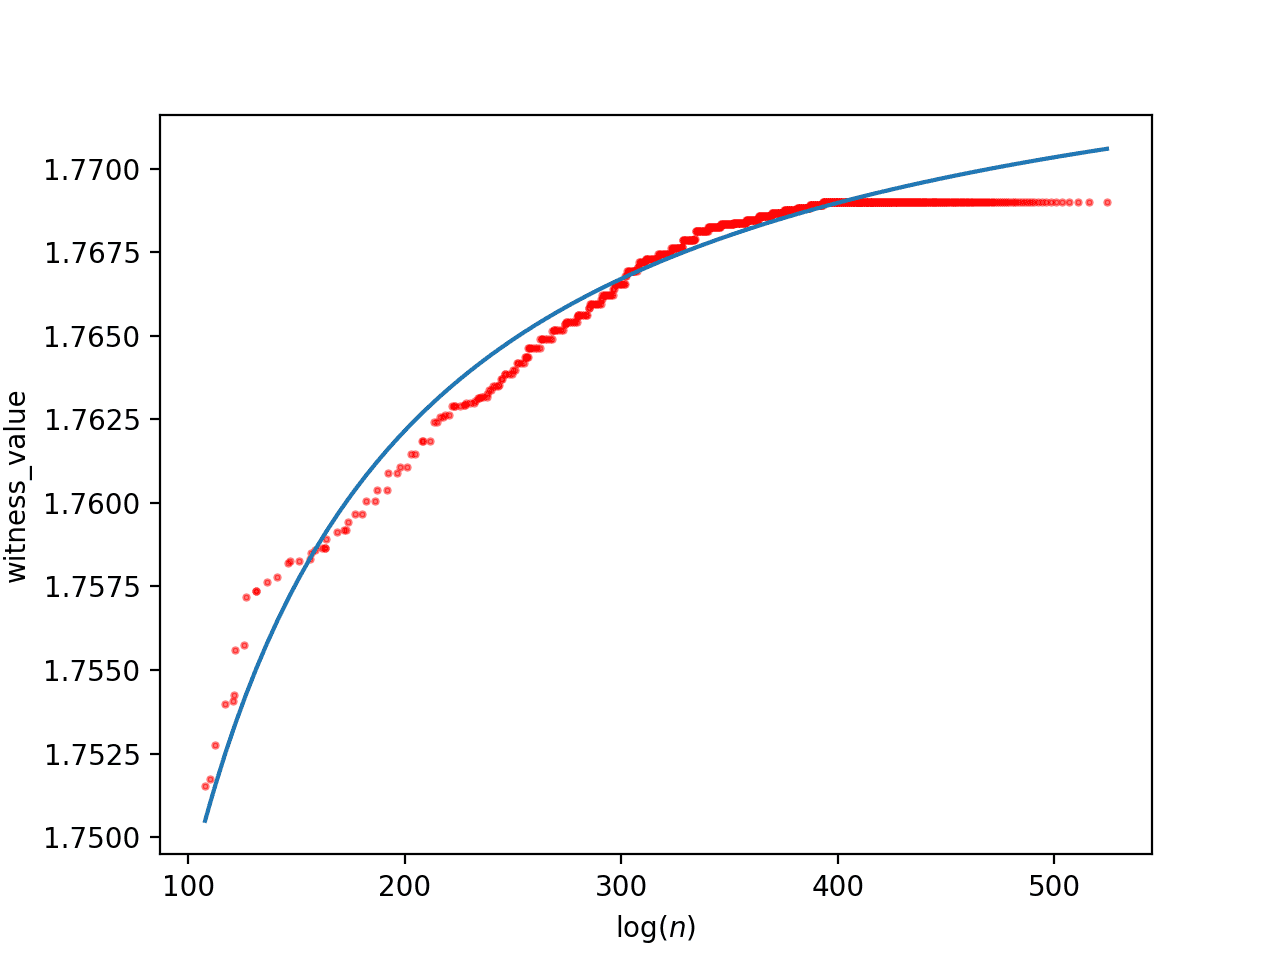 The fit of the large database to a + b/x. Note the asymptote of 1.7757 suggests this will not disprove RH.